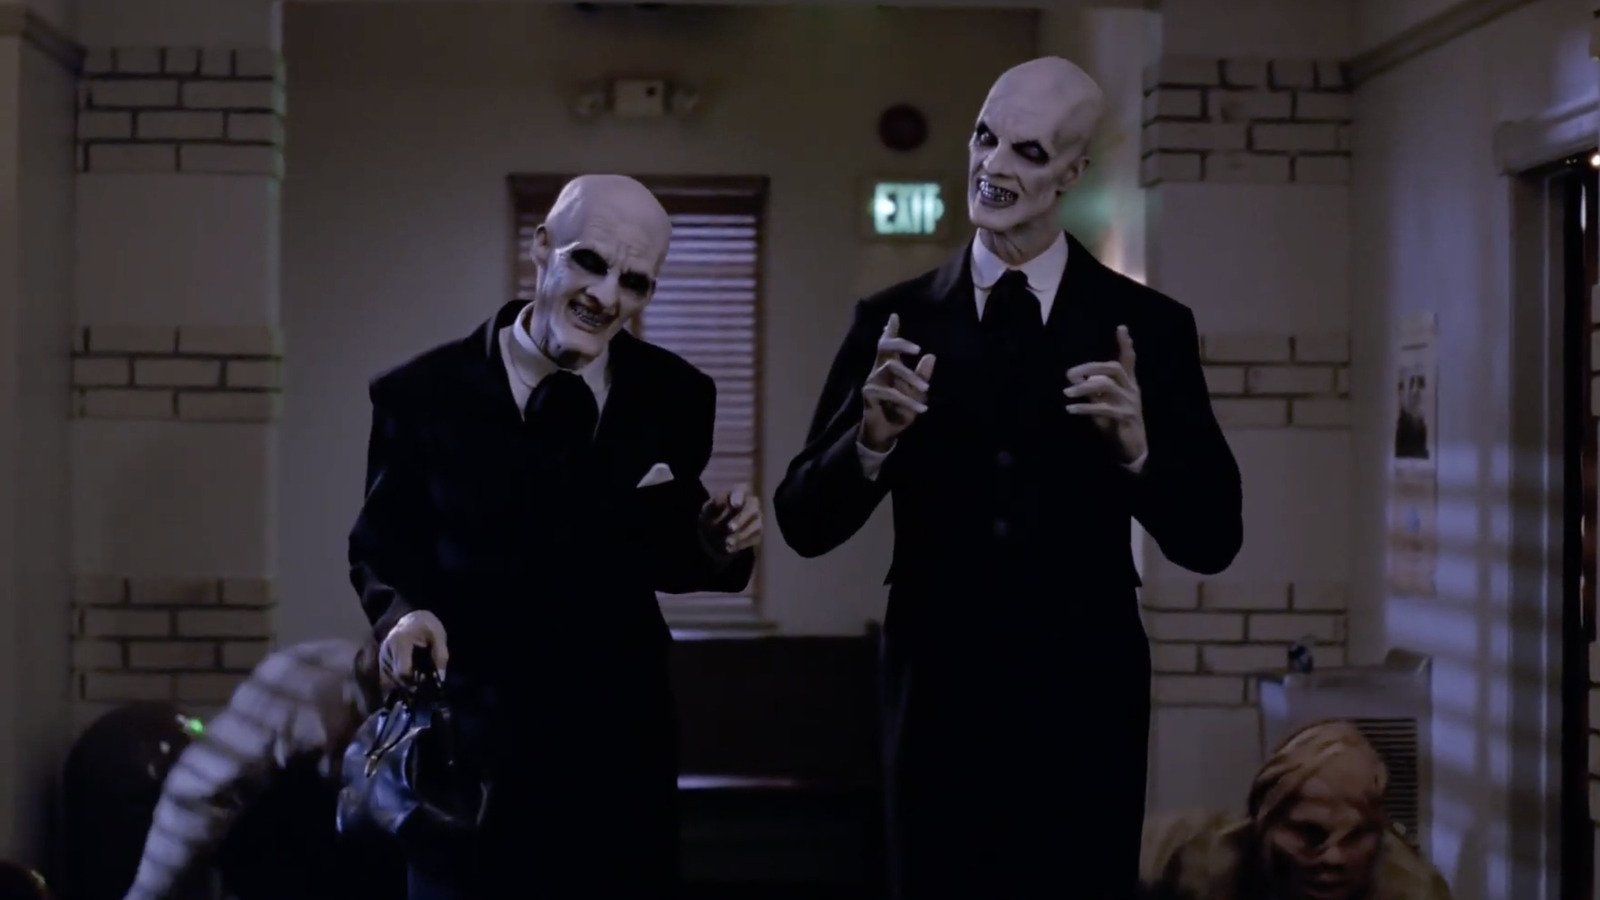 #Casting Buffy’s Gentlemen All Came Down To That Creepy Smile